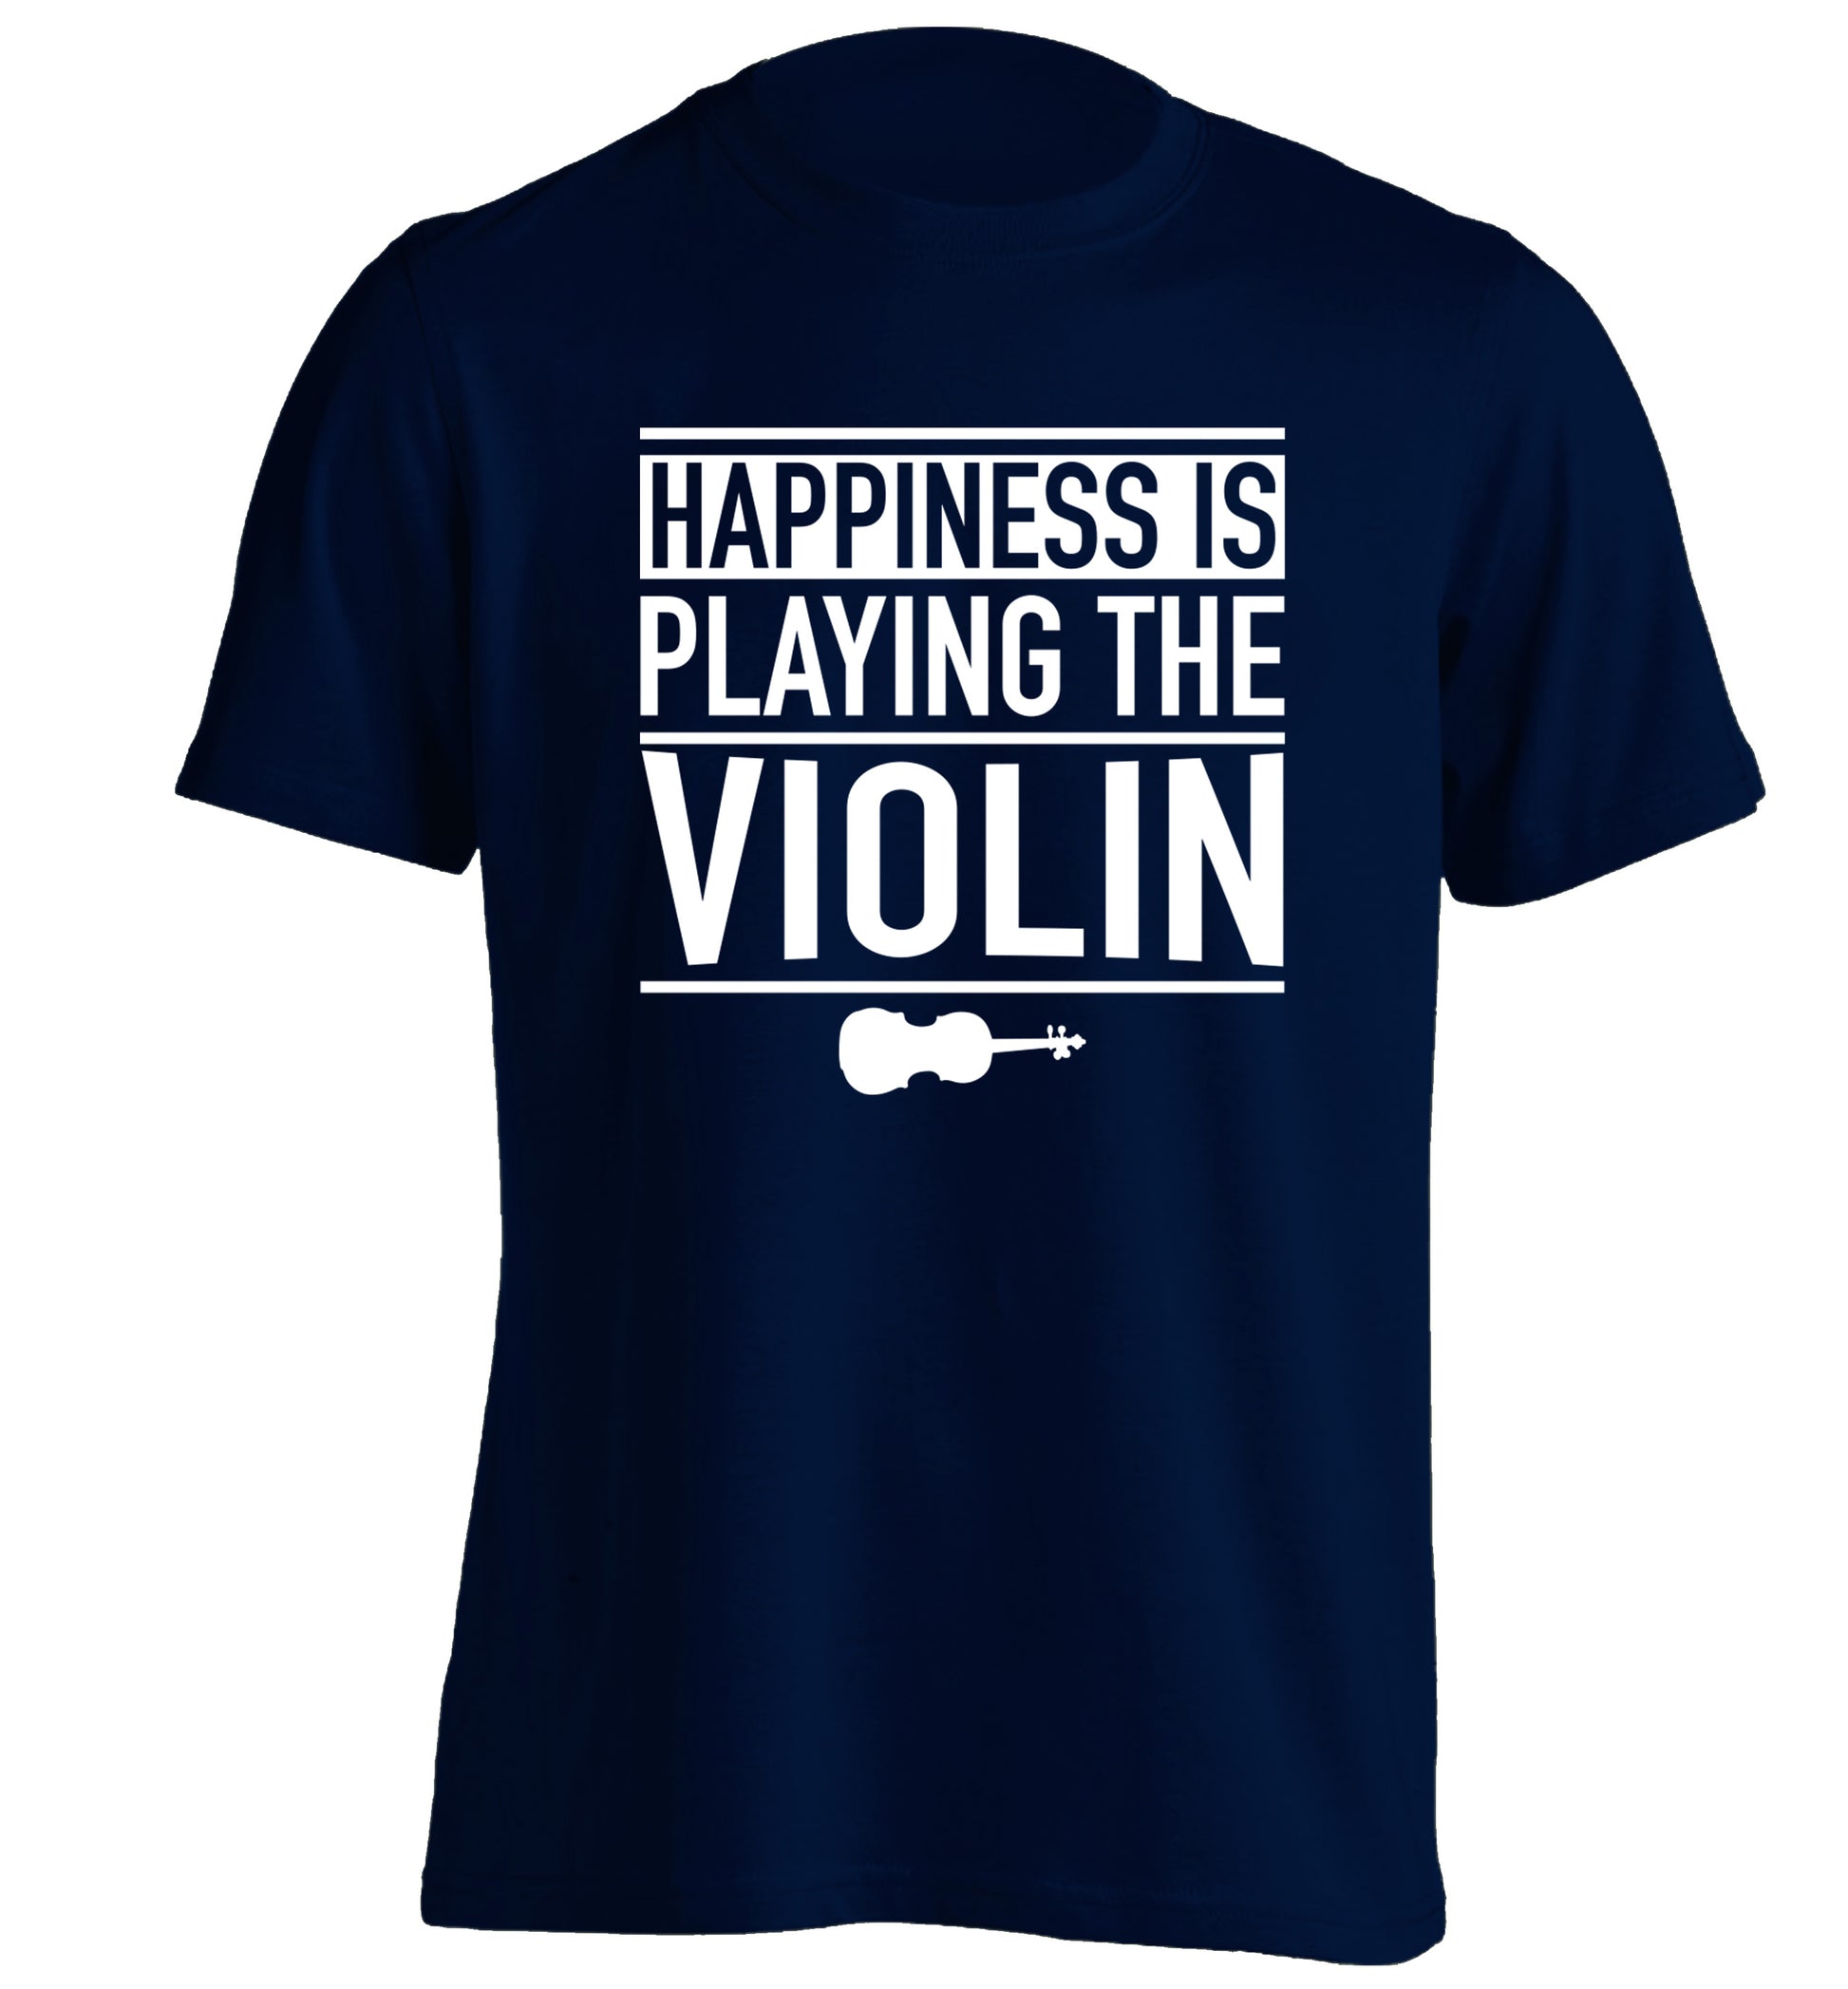 Happiness is playing the violin adults unisex navy Tshirt 2XL